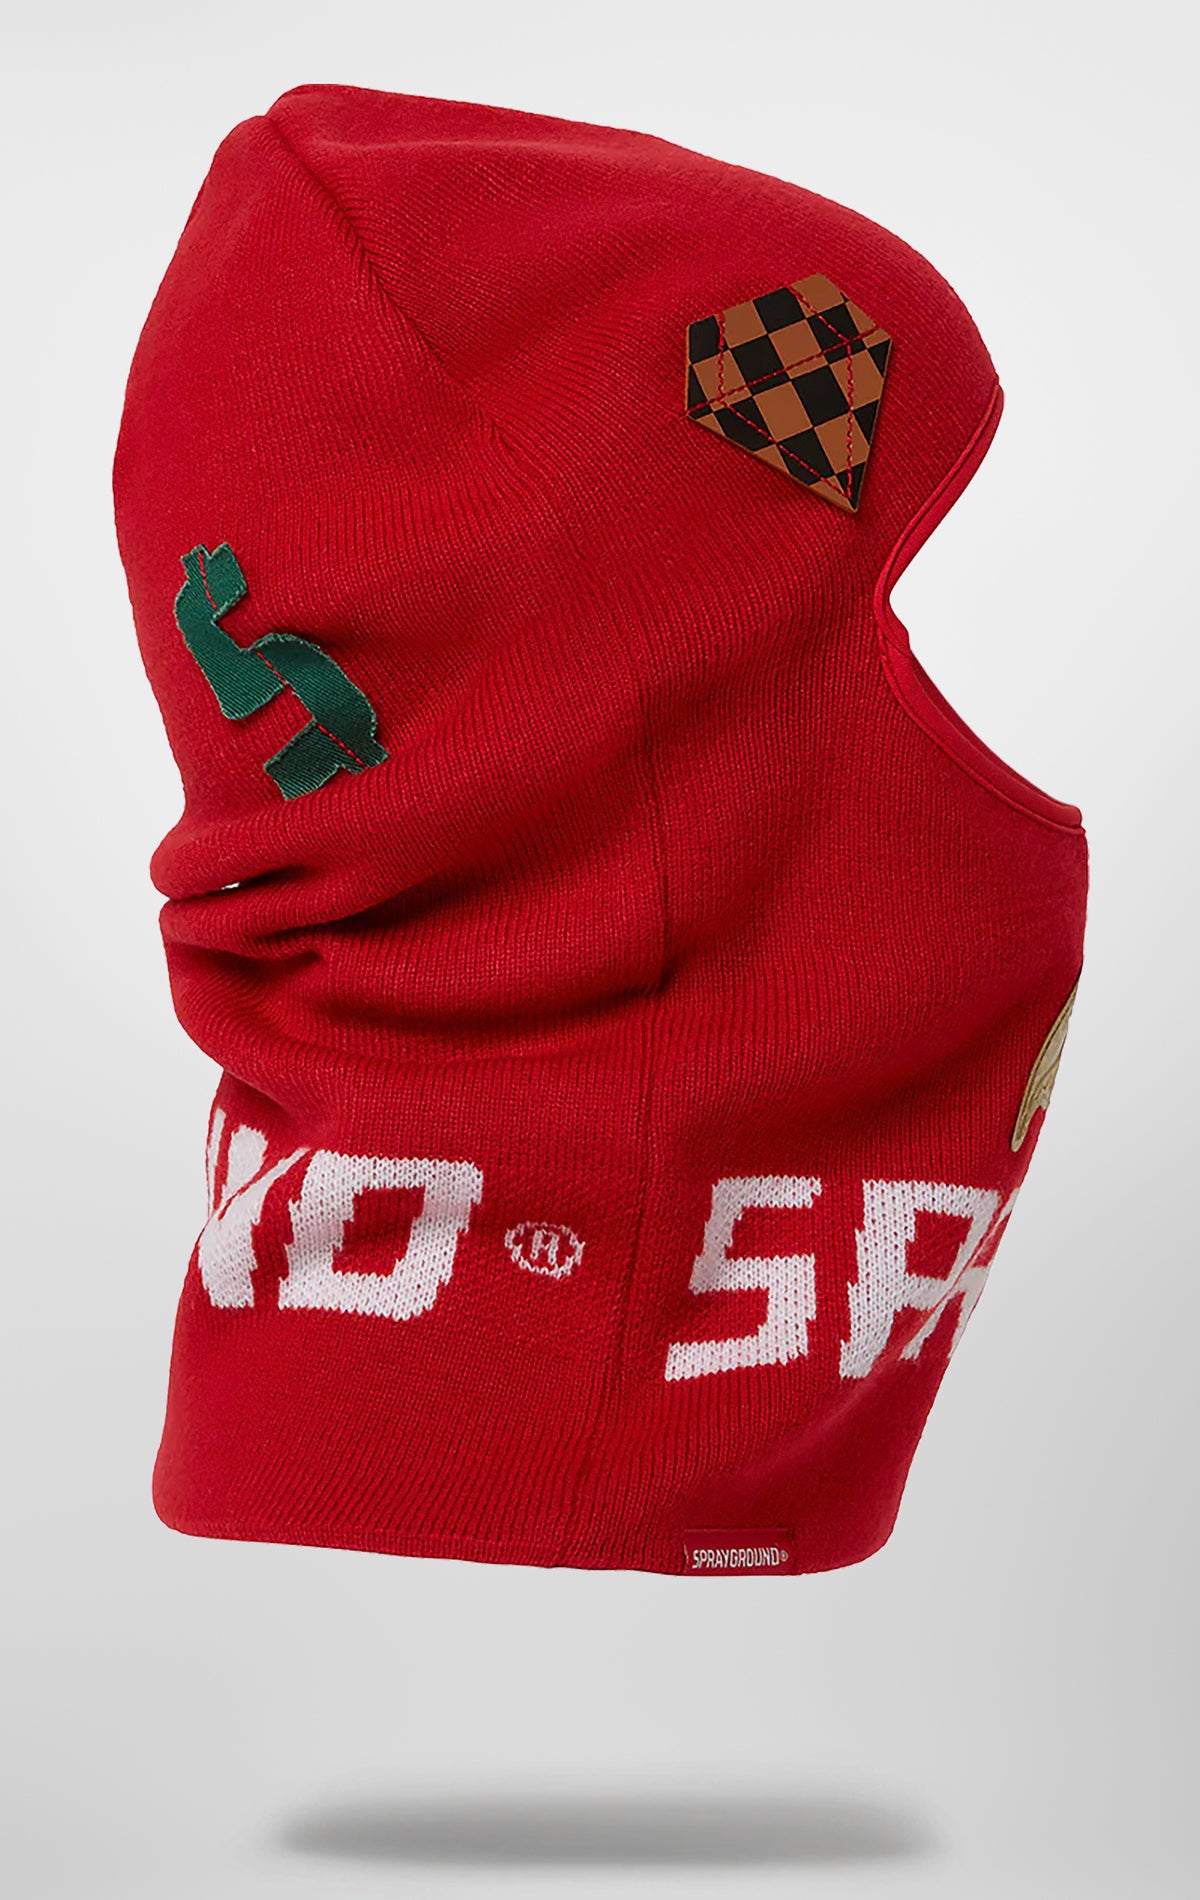 A stylish and warm limited-edition cozy ski mask featuring a soft and warm knitted construction, one-size-fits-all design, and perfect for winter outdoor activities.